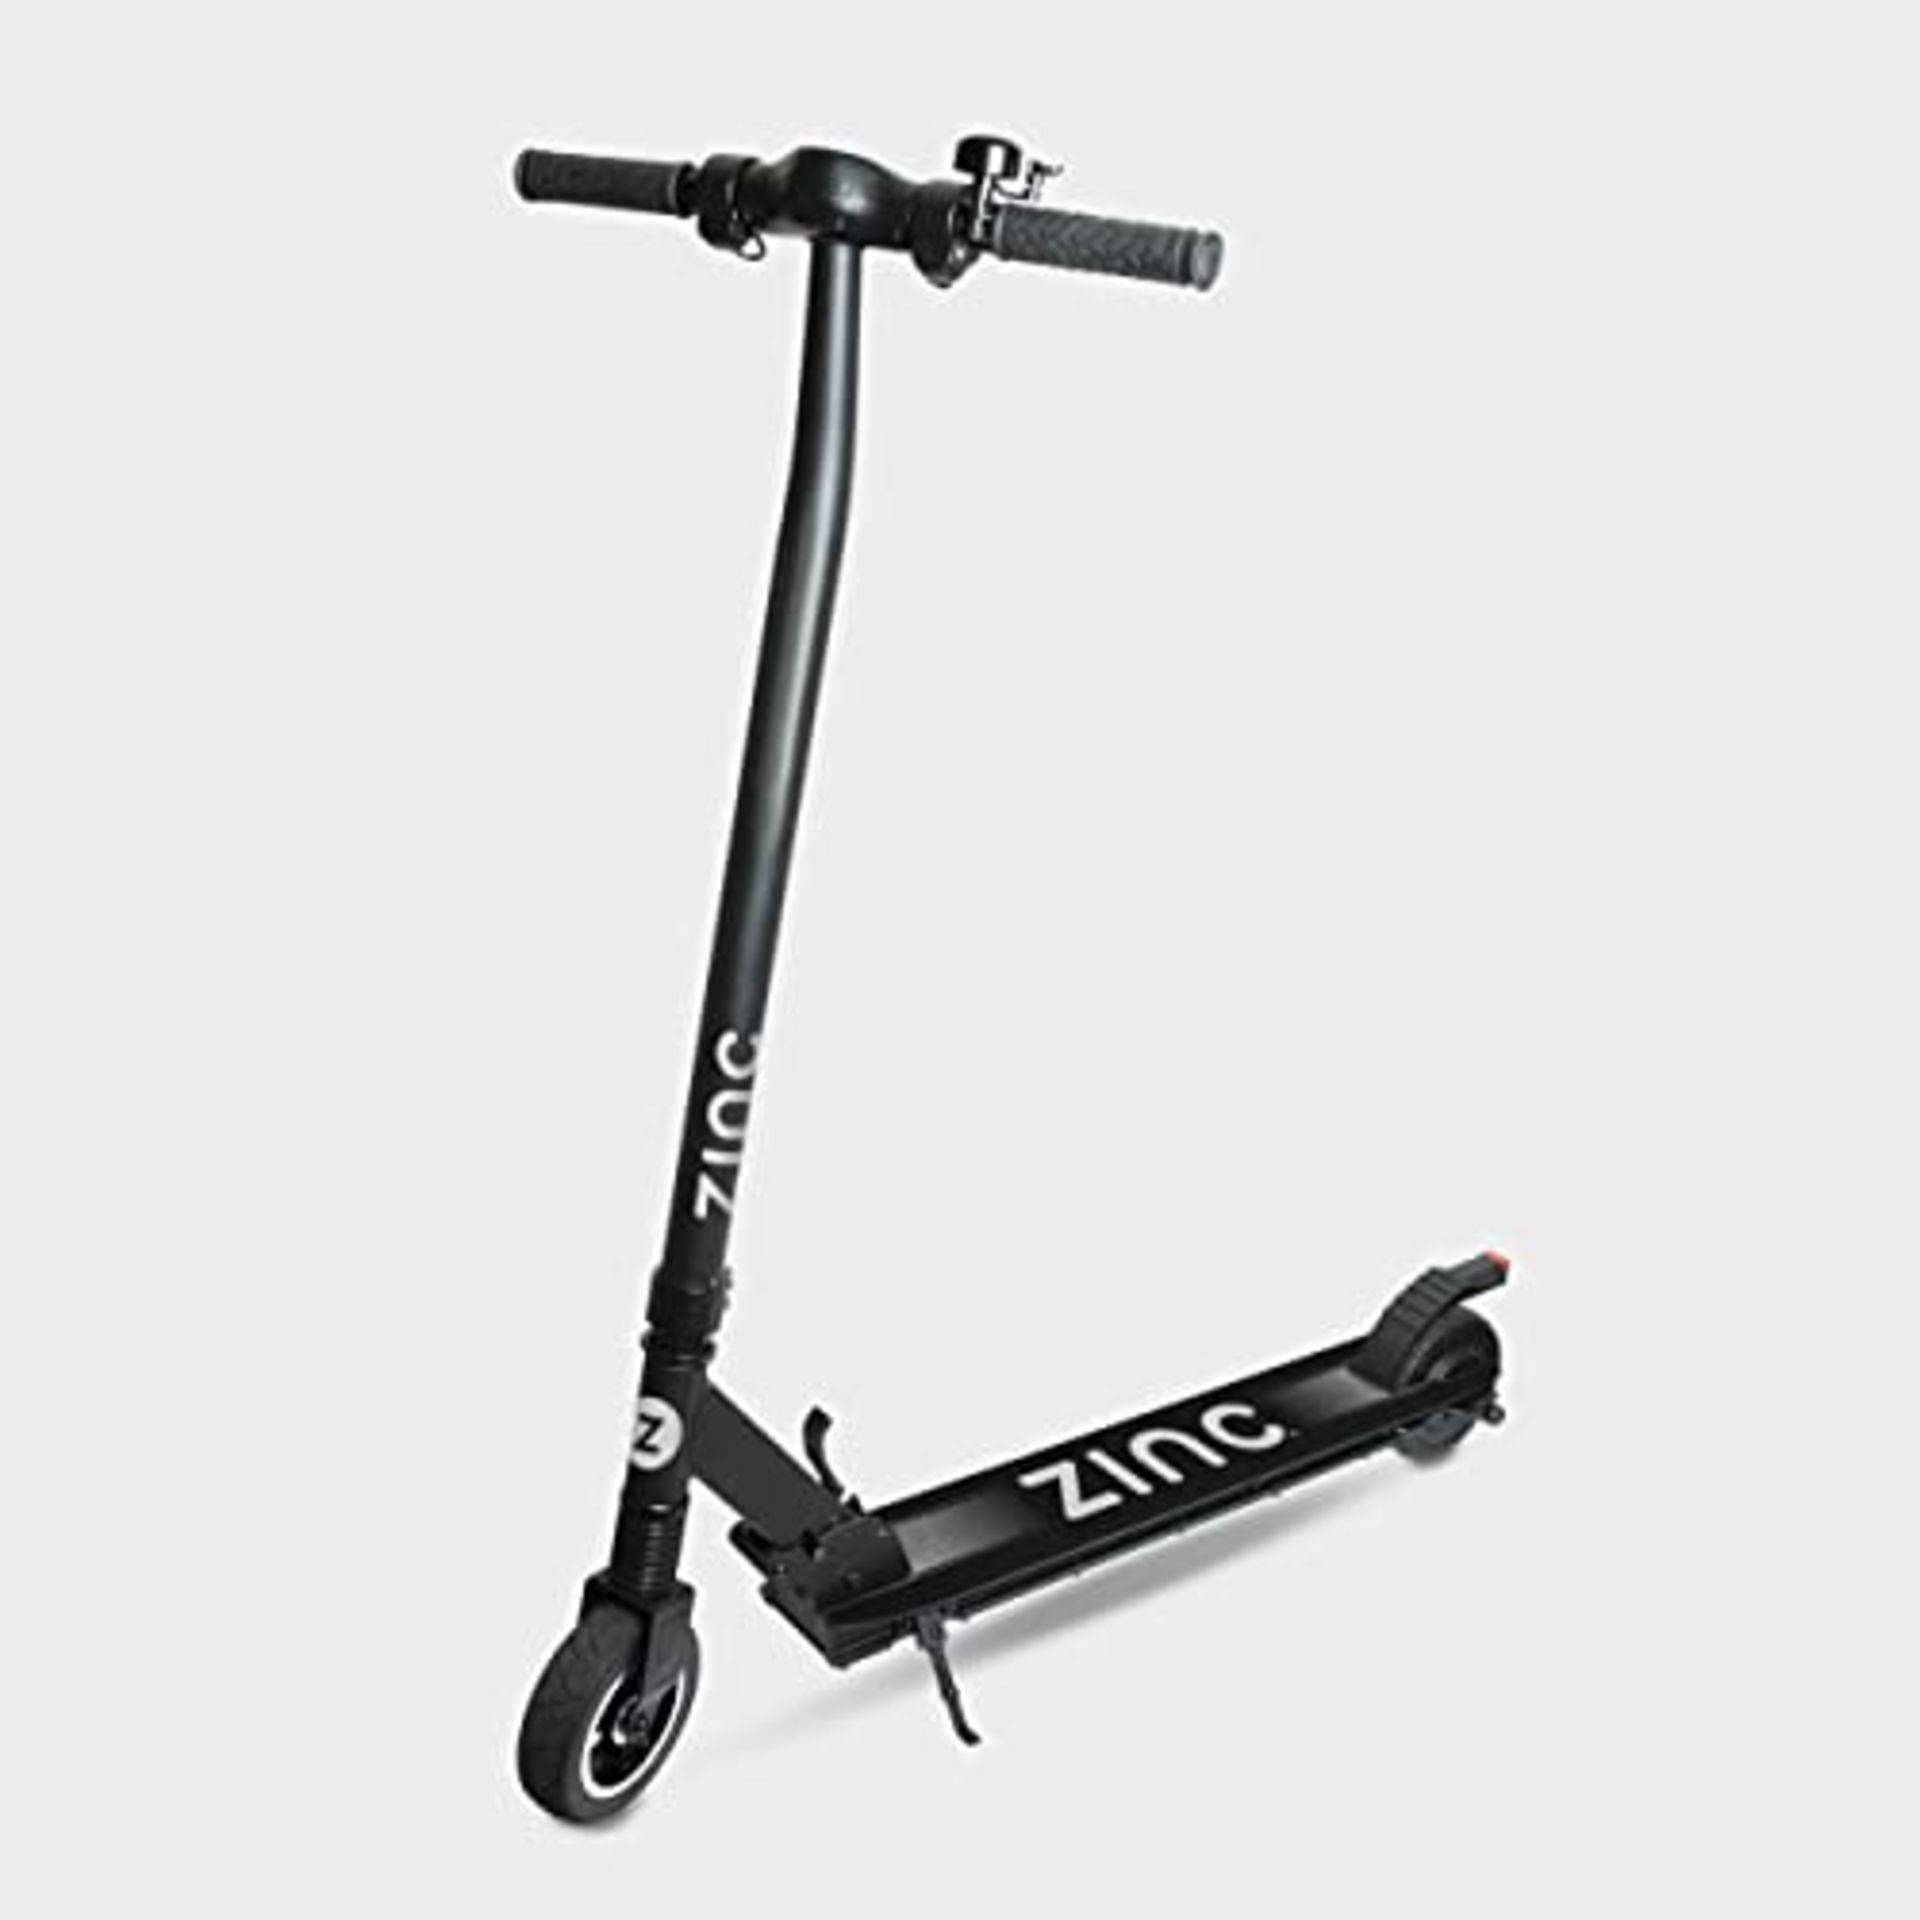 RRP £250.00 Zinc Unisex Kick E-scooter Folding Electric Eco Scooter - Black [ without charger ]